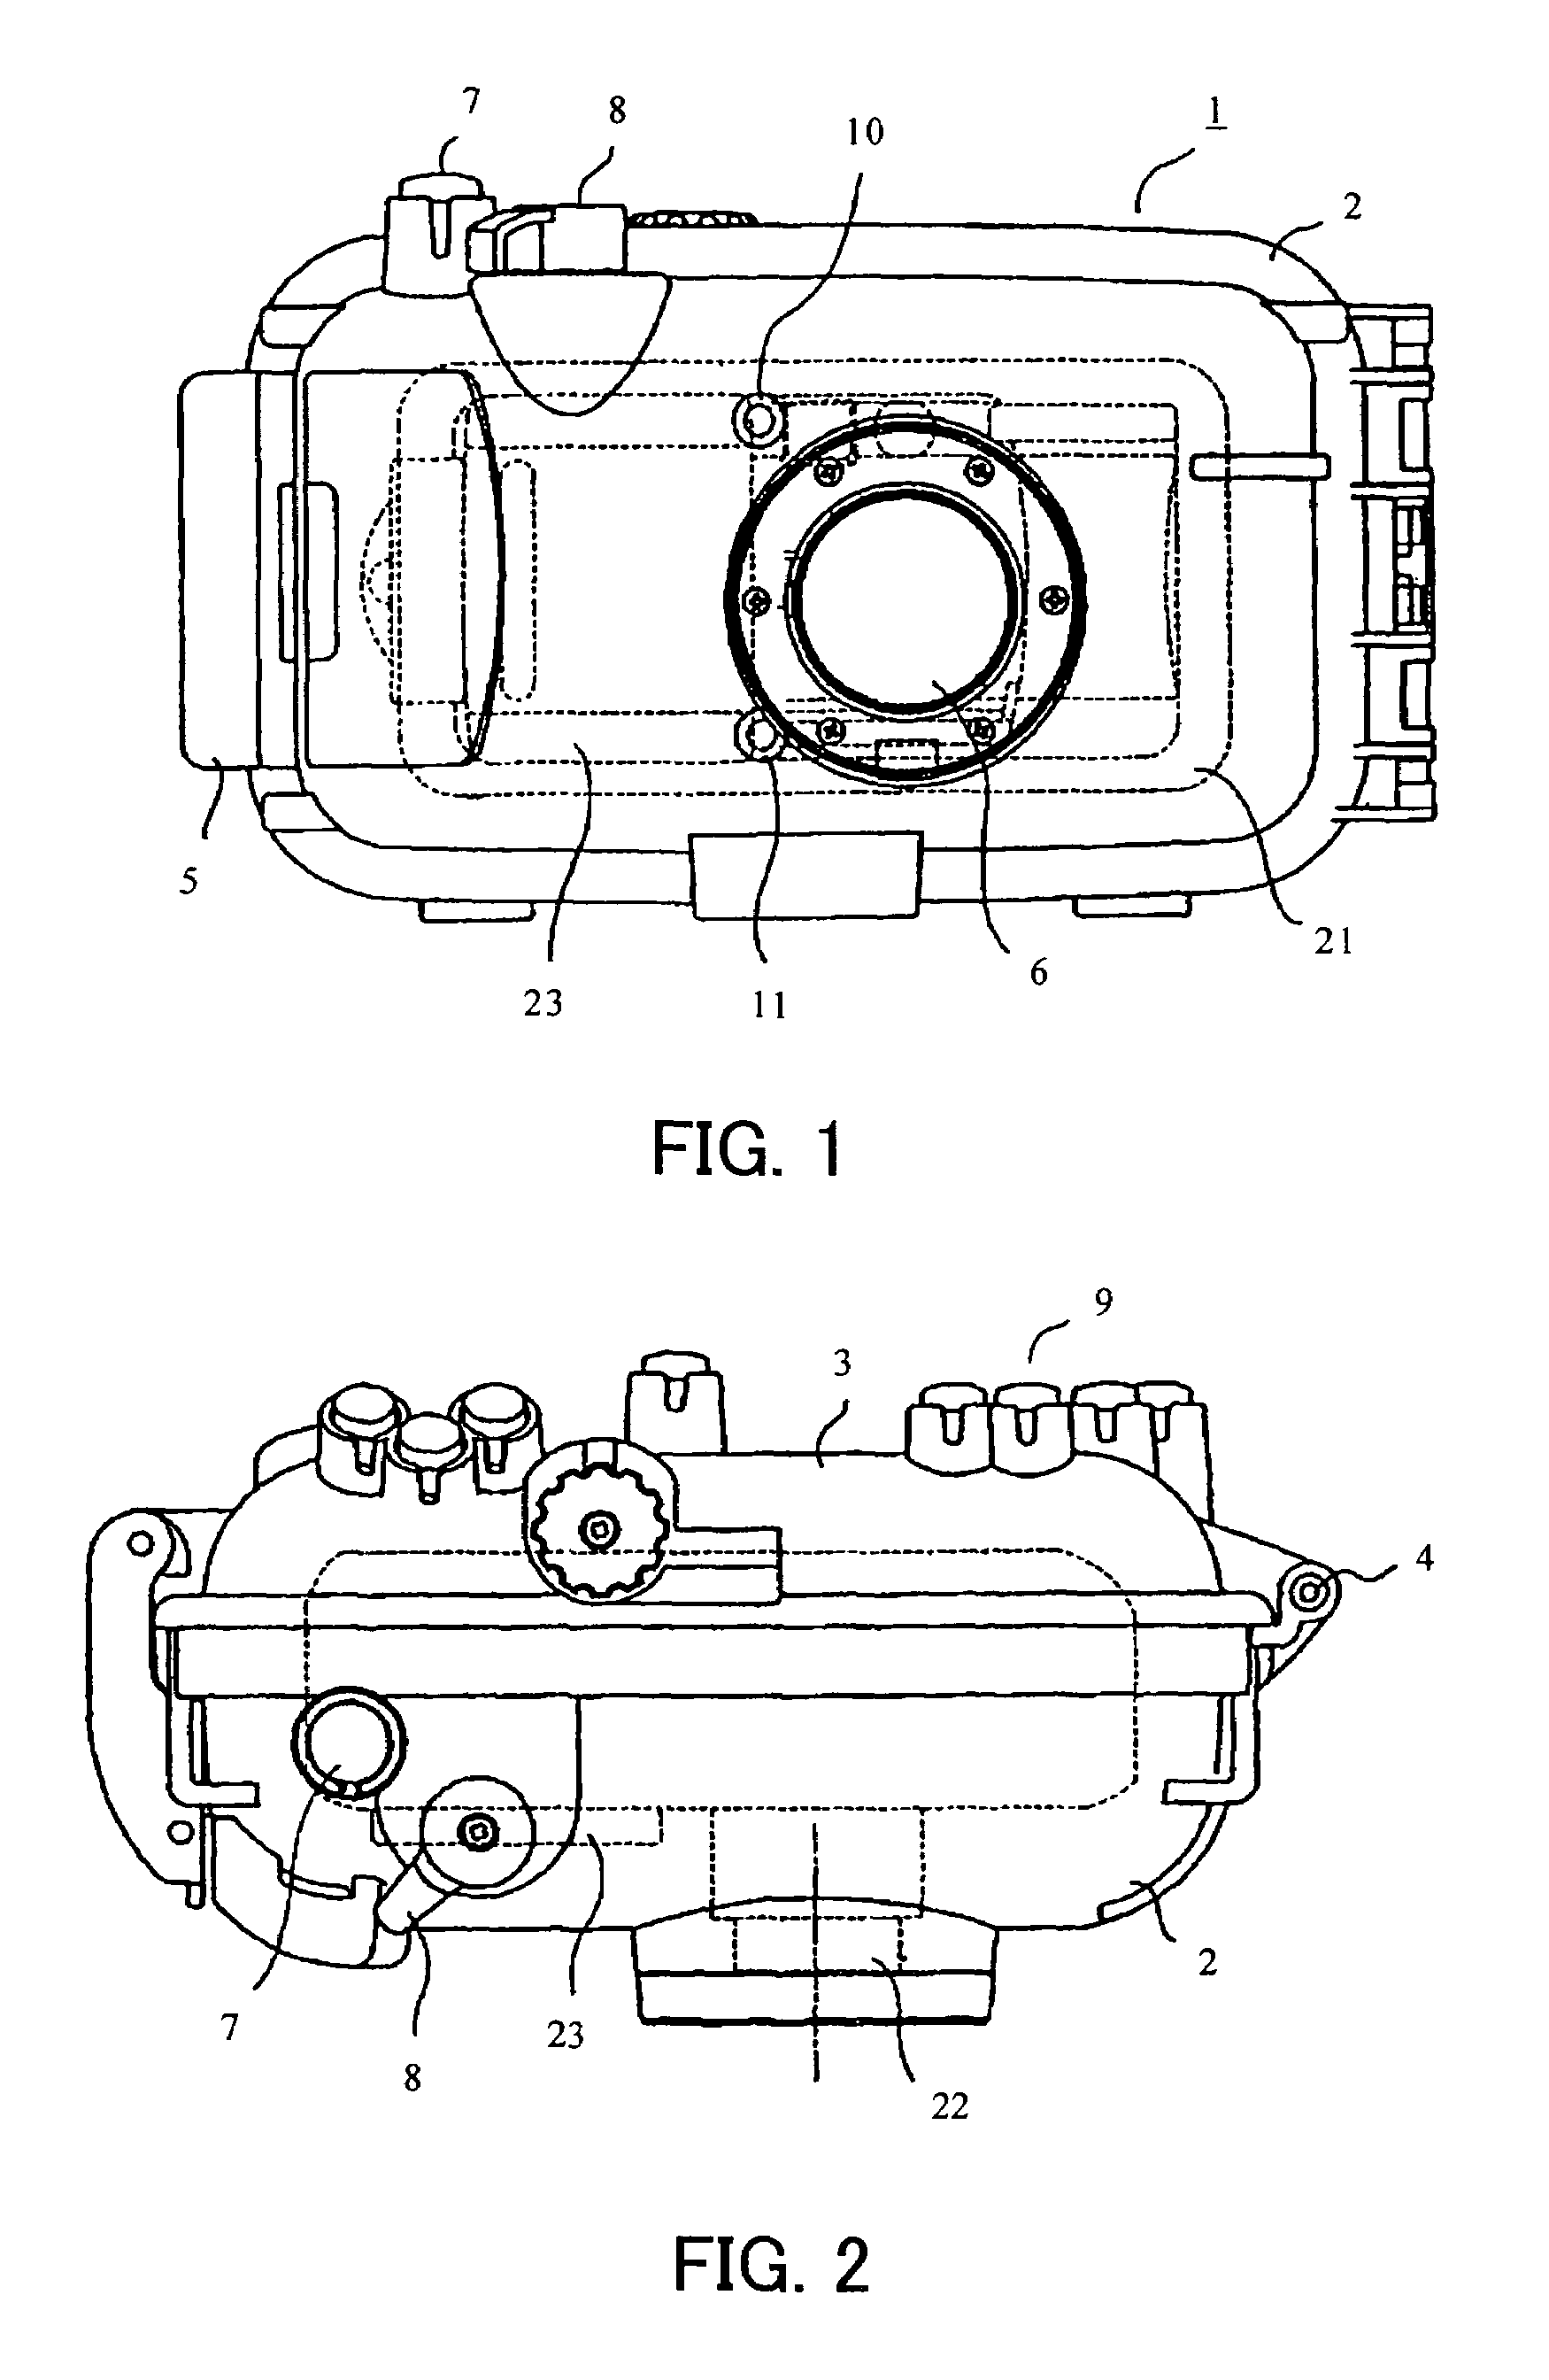 Waterproof camera case for containing camera equipped with lens barrier